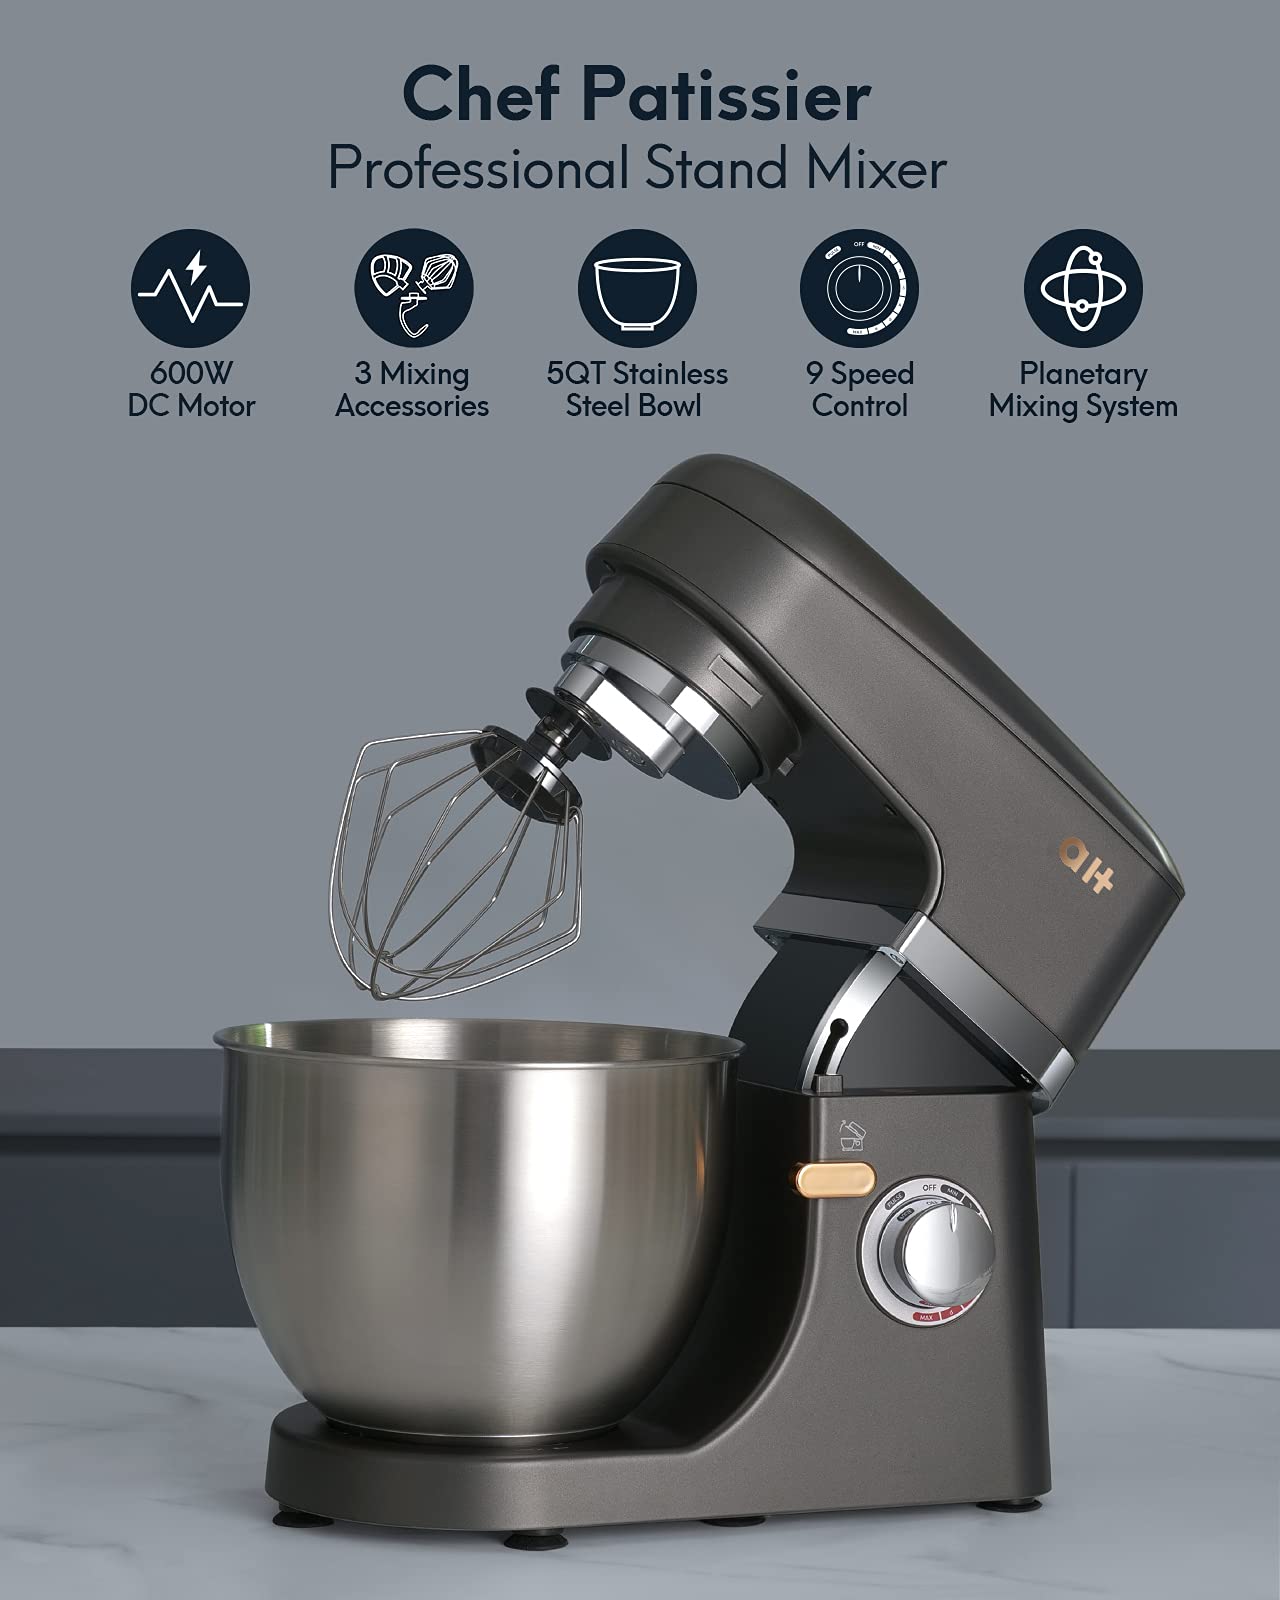 Load image into Gallery viewer, Stand Mixer 8+1-Speed Tilt-Head, 600W Kitchen Electric Mixer with 5QT Stainless Steel Bowl,Planetary Mixing System, Dough Hook, Flat Beater, Whisk, Splash Guard, Dishwasher Safe,Grey
